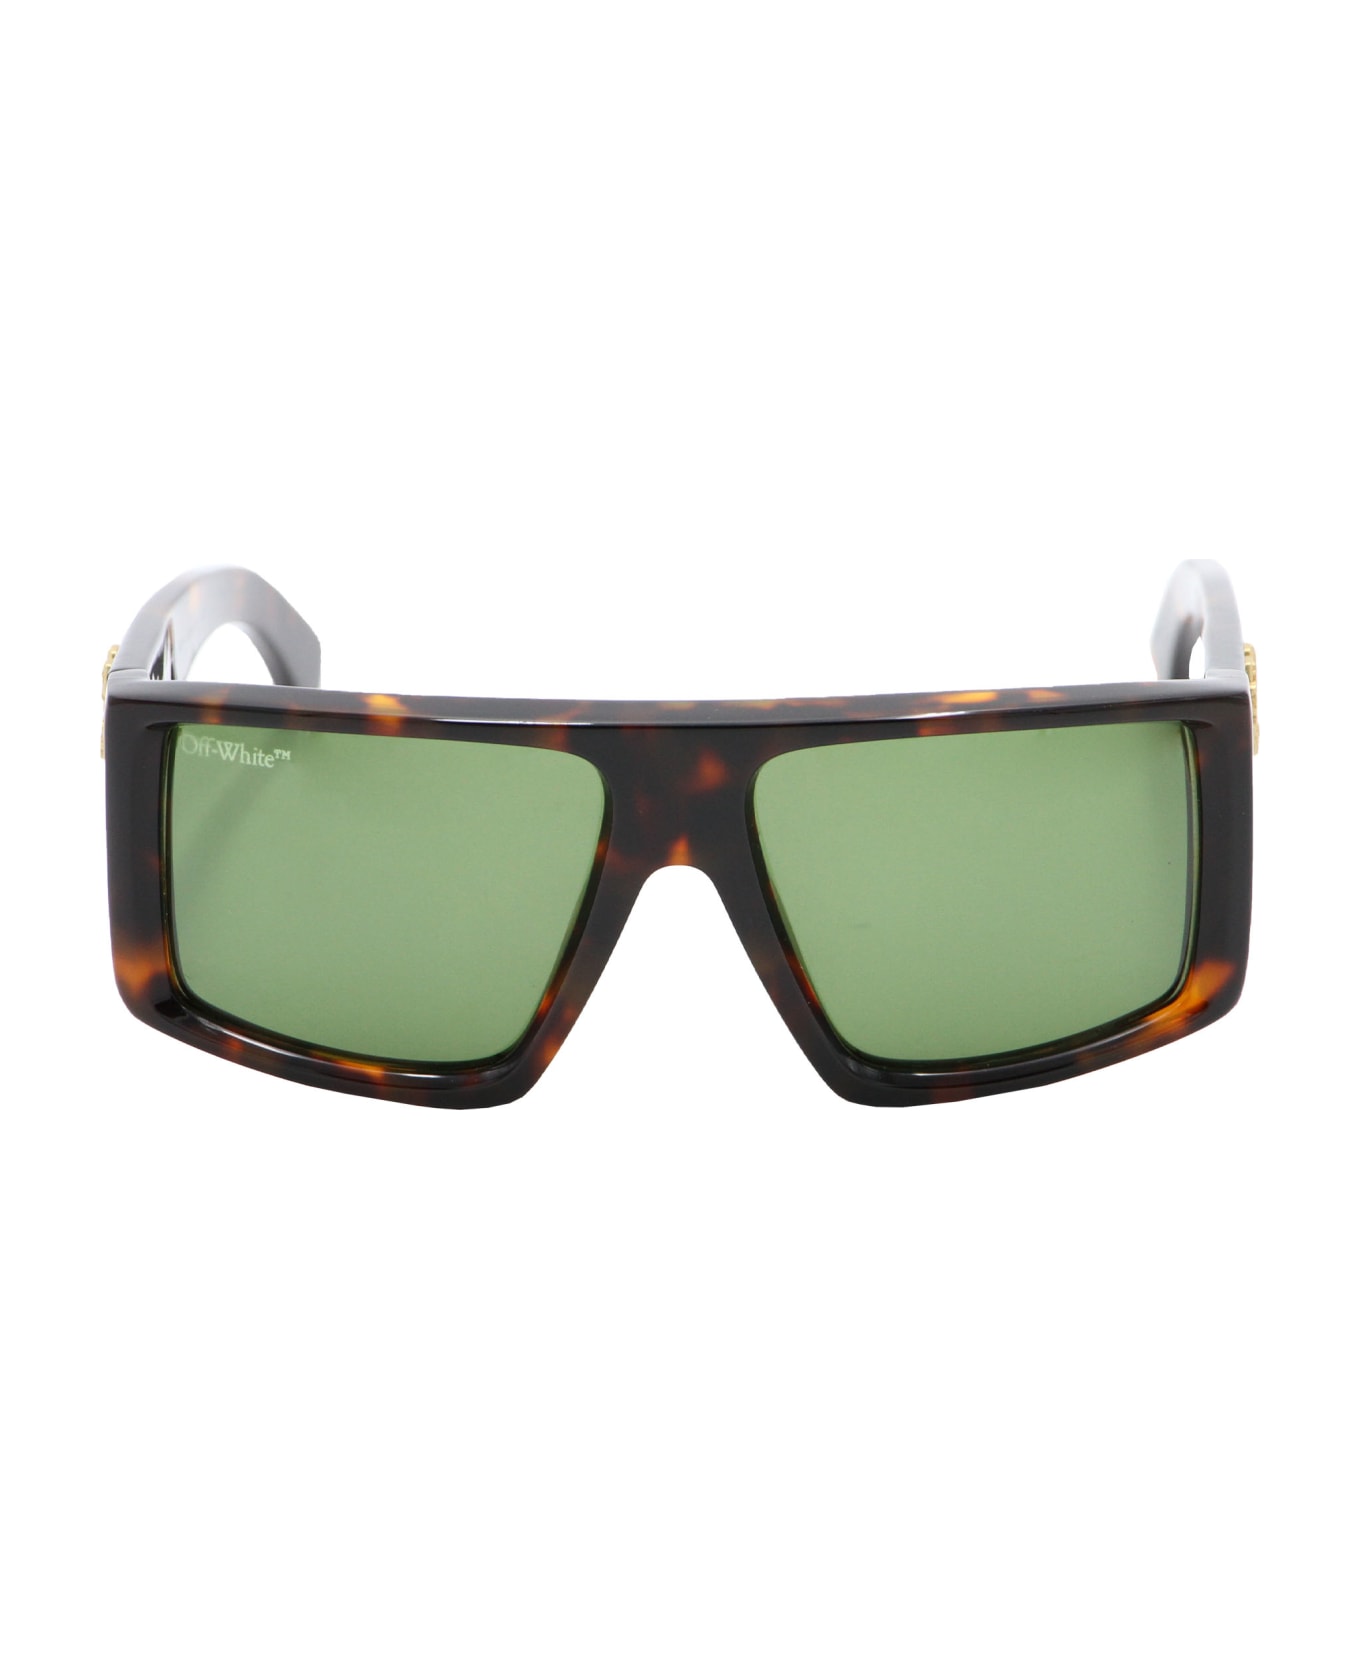 Off-White Squared Sunglasses - brown サングラス